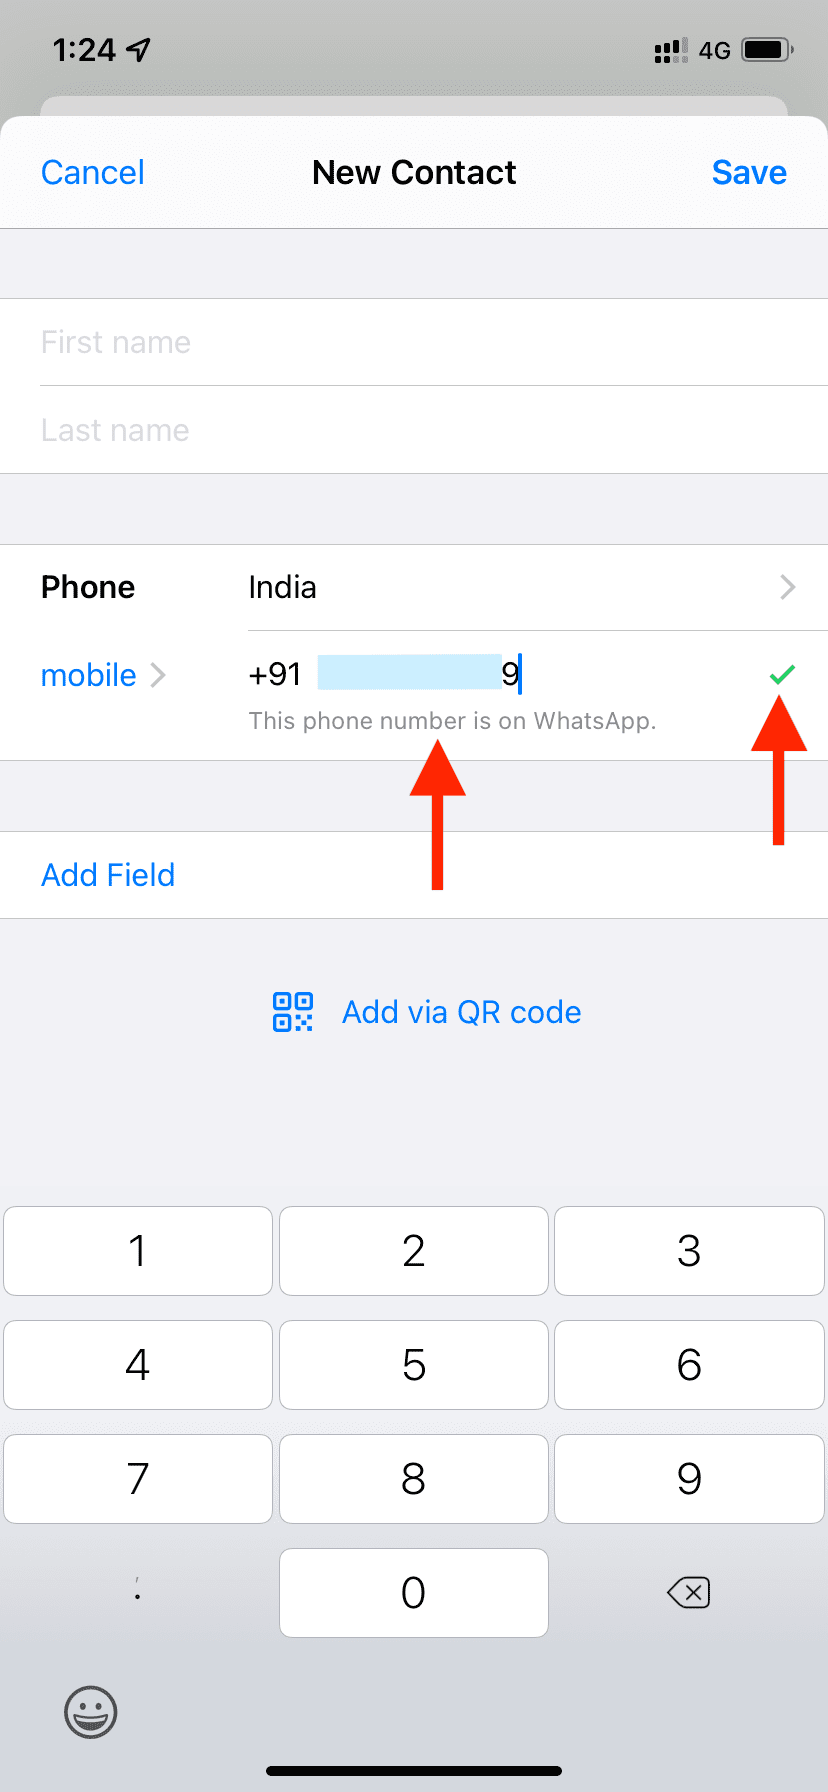 This phone number is on WhatsApp